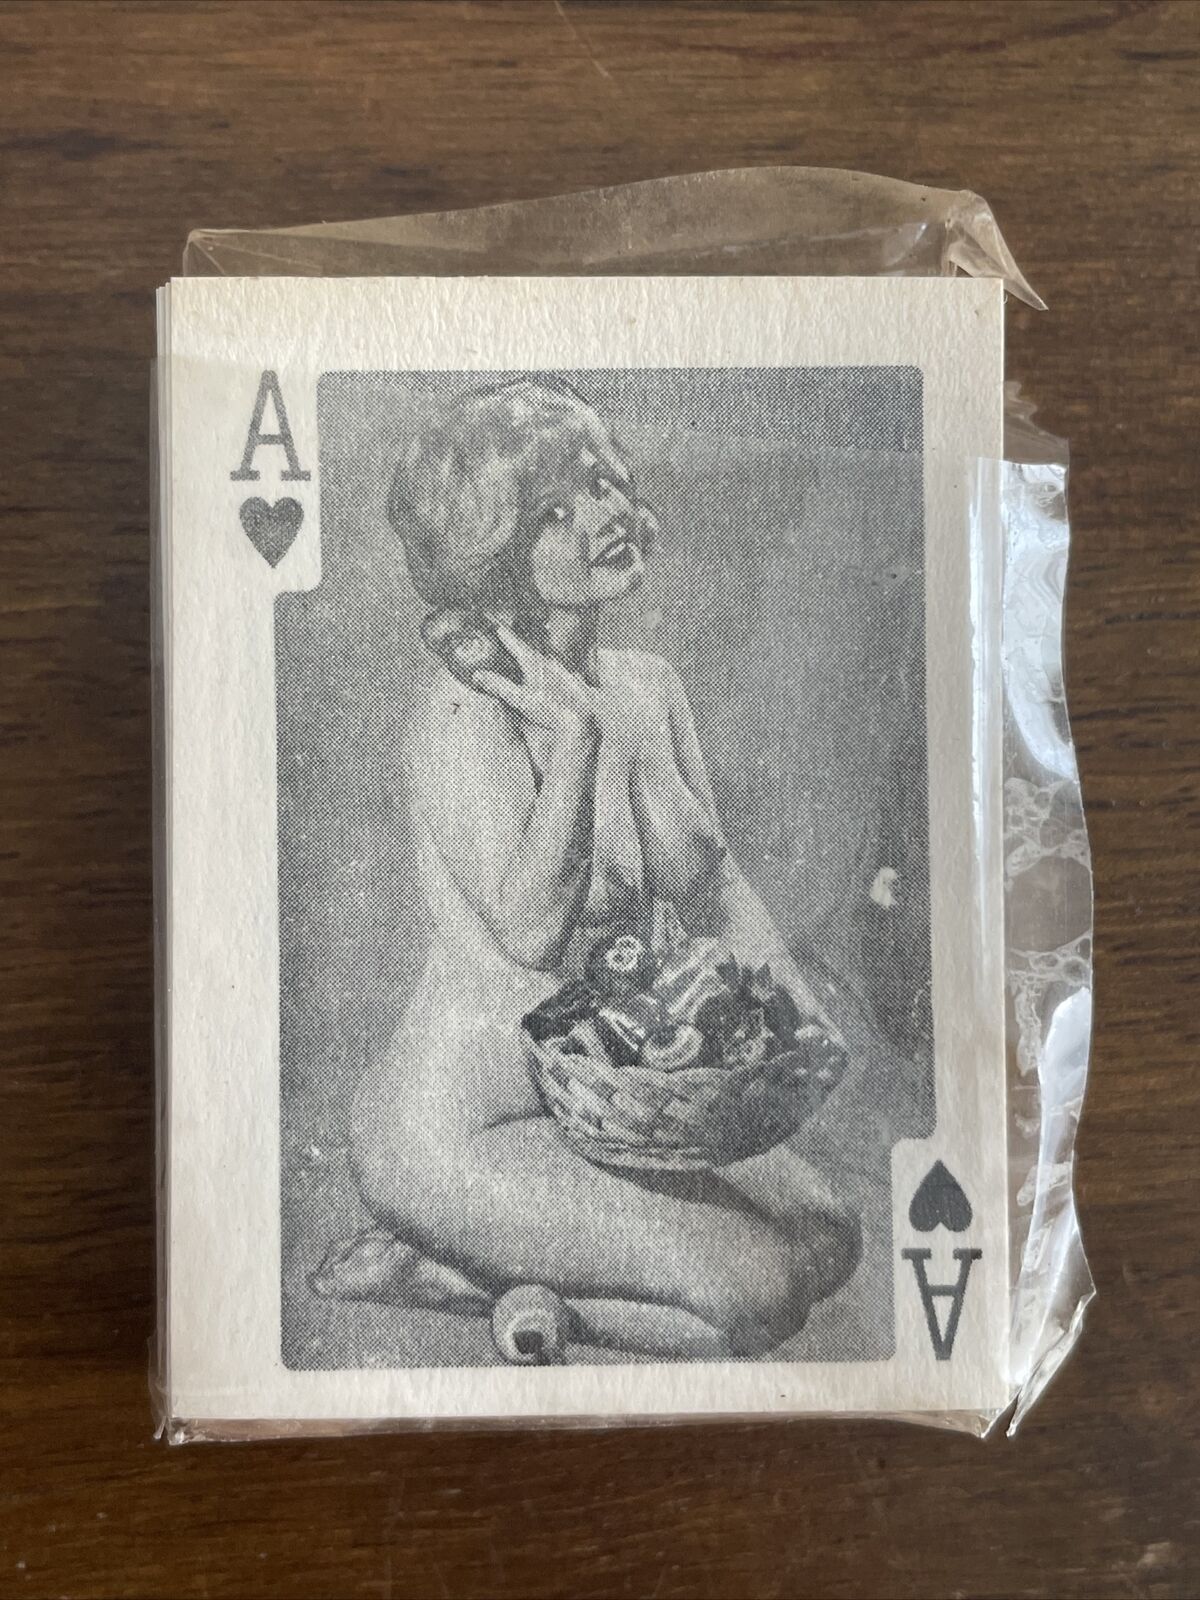 RARE Vintage 1960's Novelty Dainty Mini Playing Adult Nude 54 Cards Deck